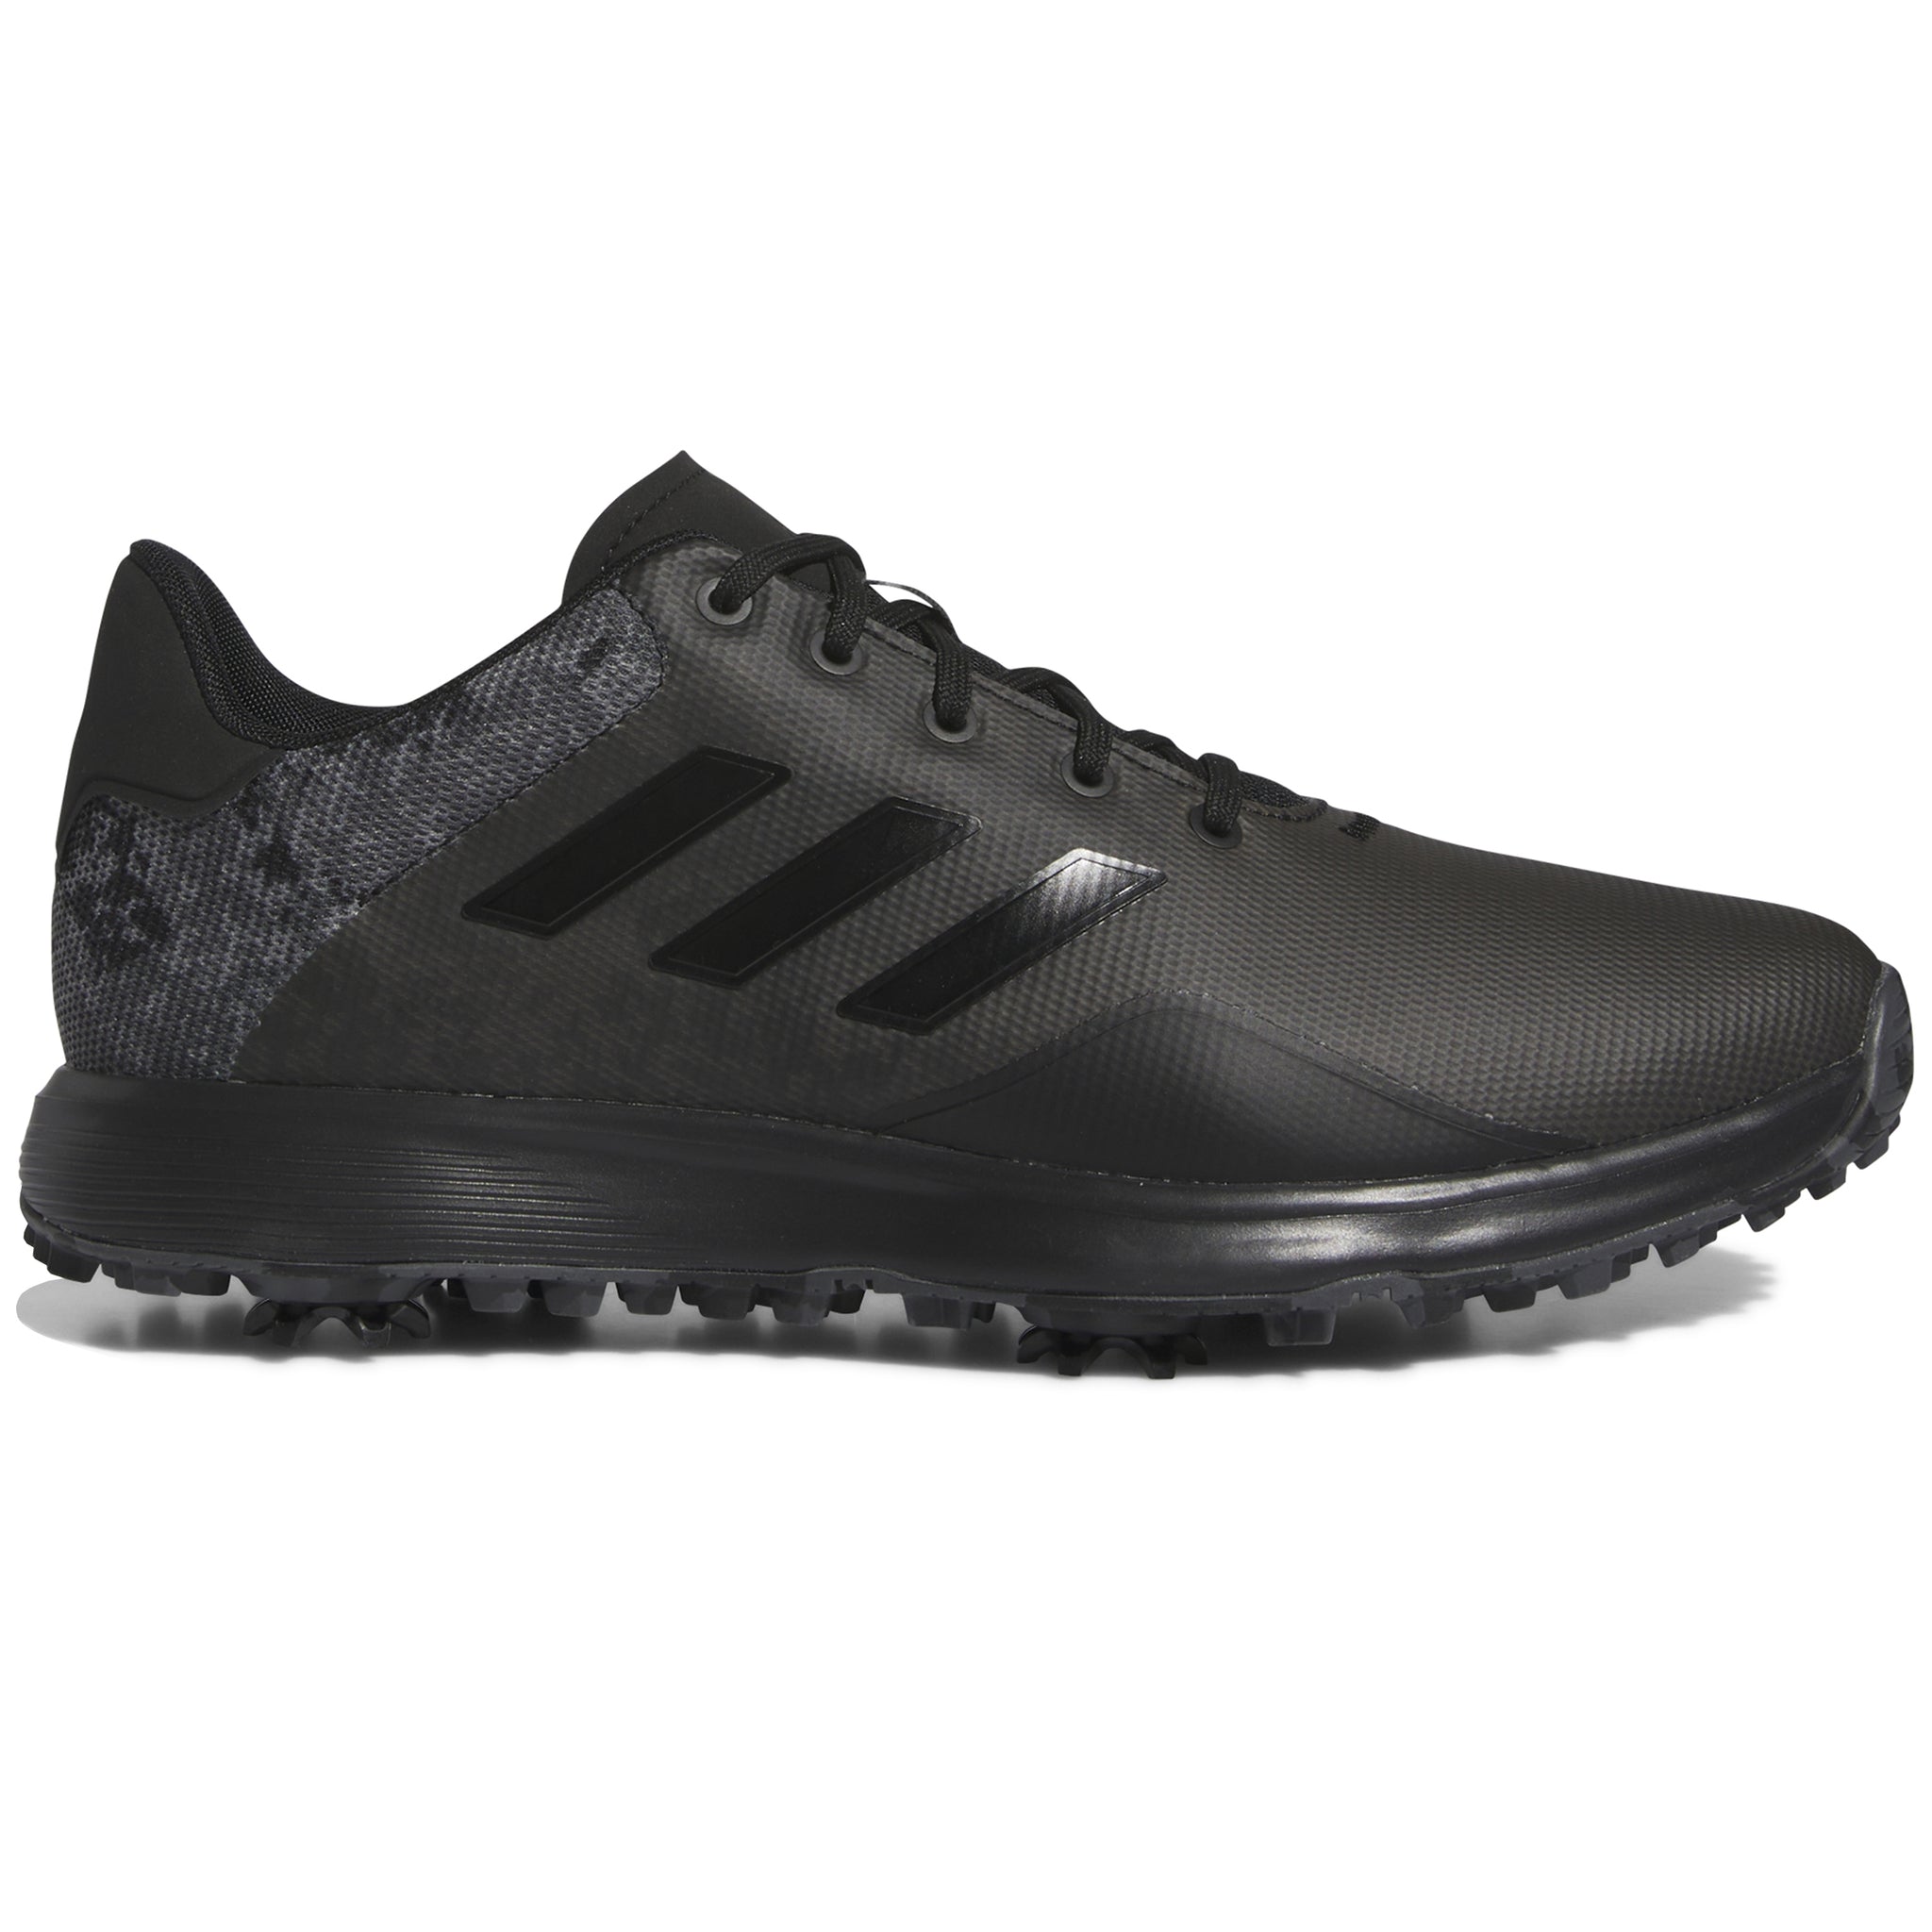 adidas-s2g-spiked-23-golf-shoes-hp3233-core-black-grey-six